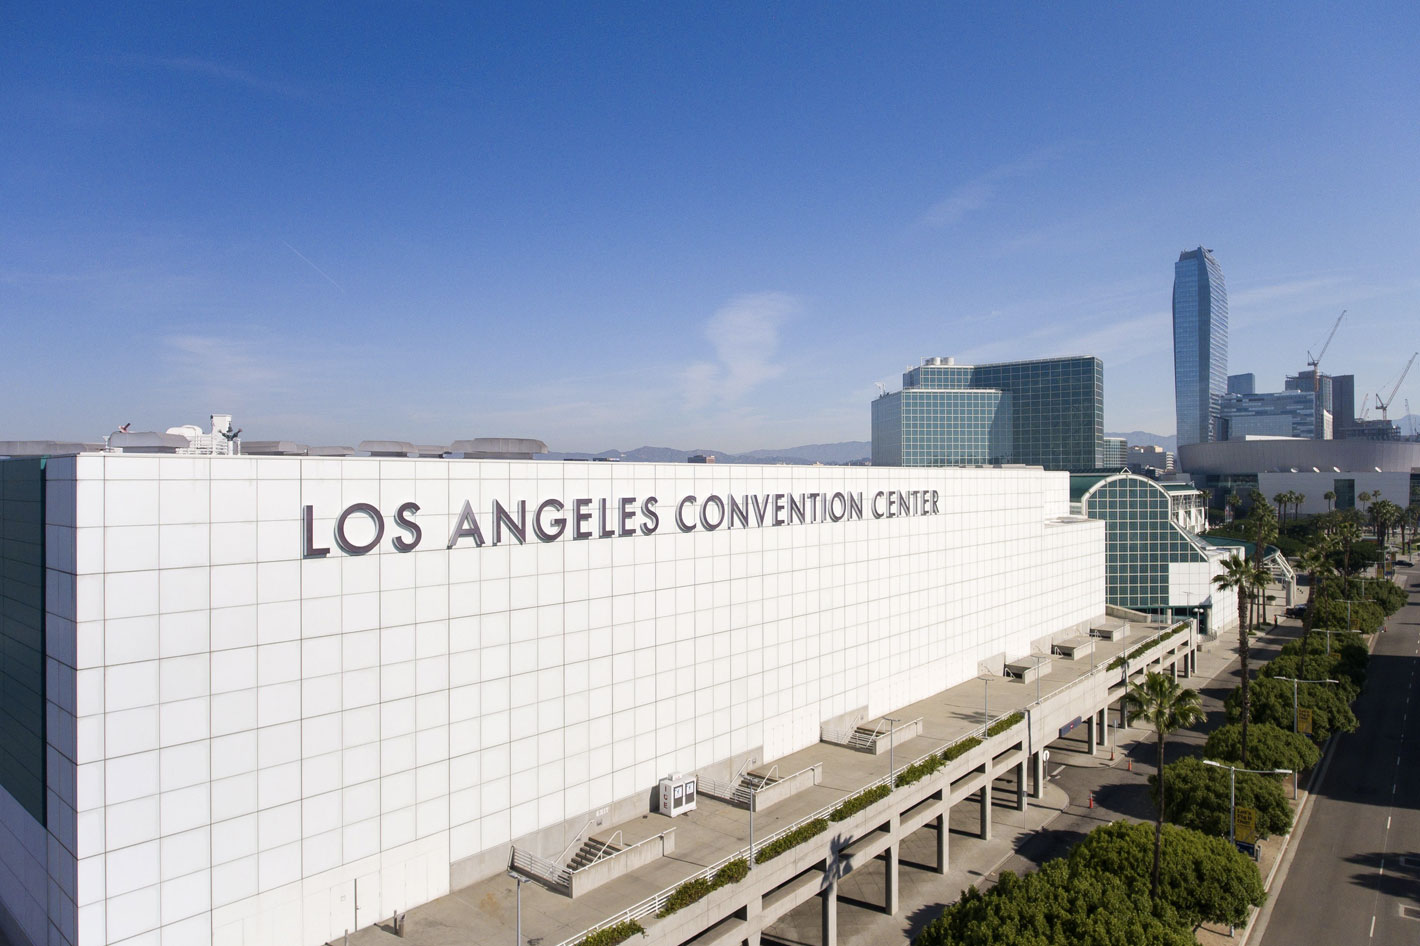 Cine Gear Expo LA: masks required for everyone